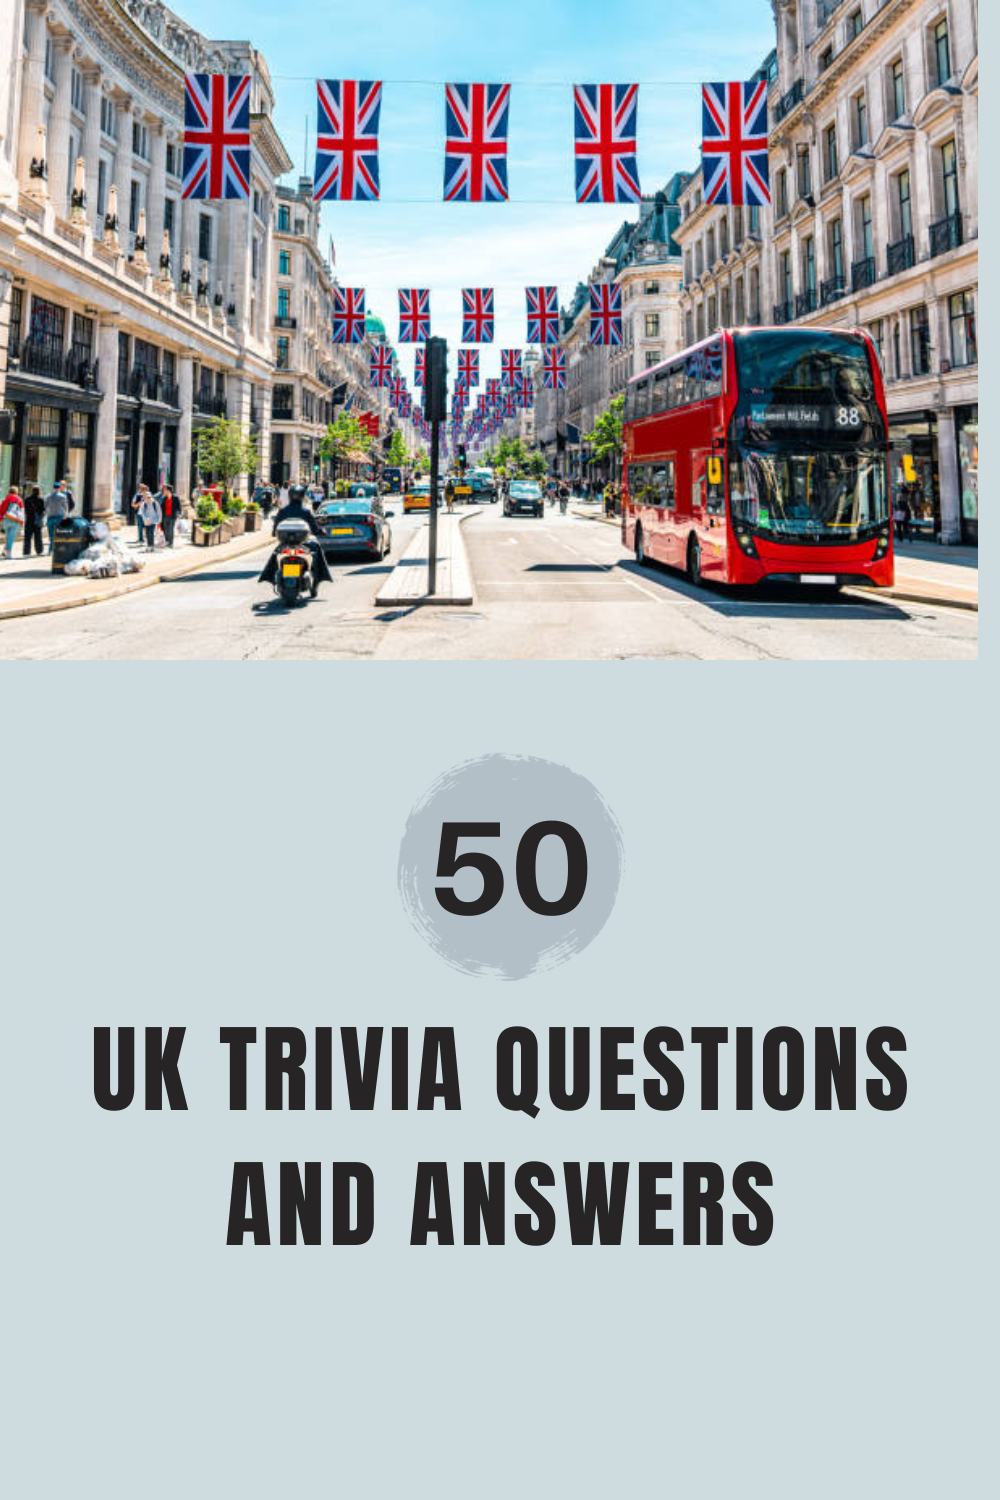 50 UK Trivia Questions and Answers